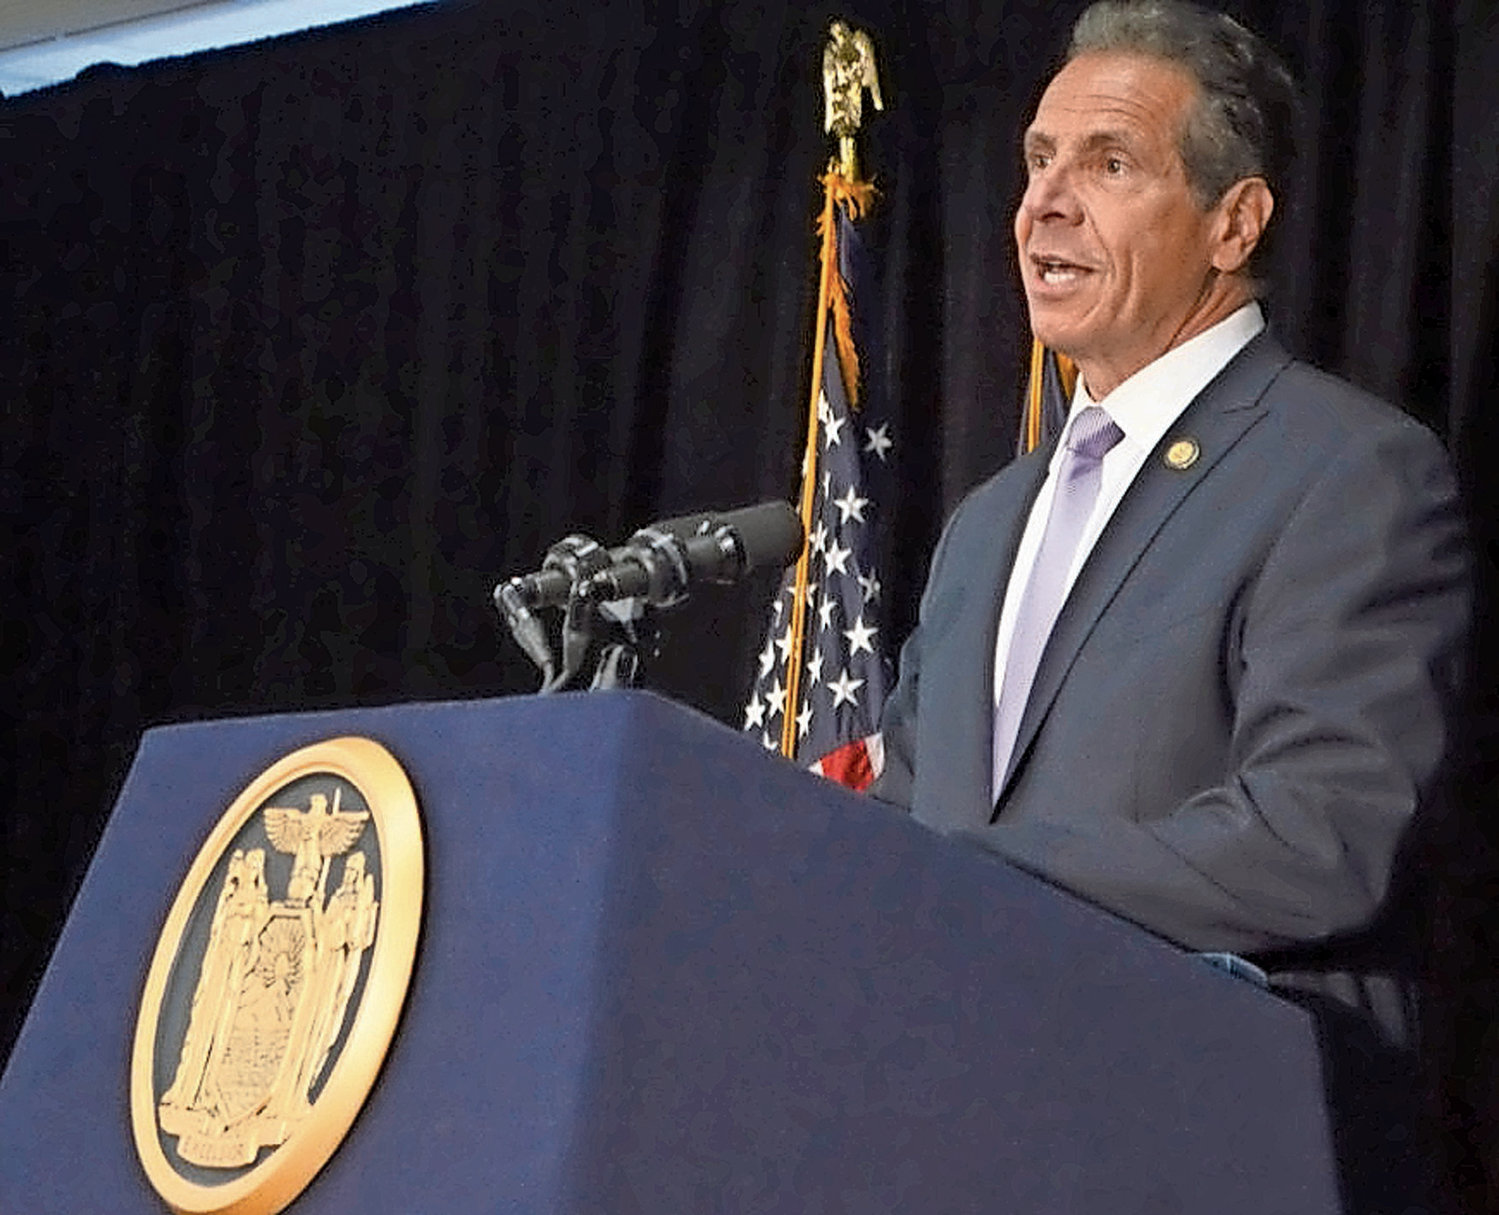 Gov. Andrew Cuomo has banned gatherings of 50 or more people because of the coronavirus.